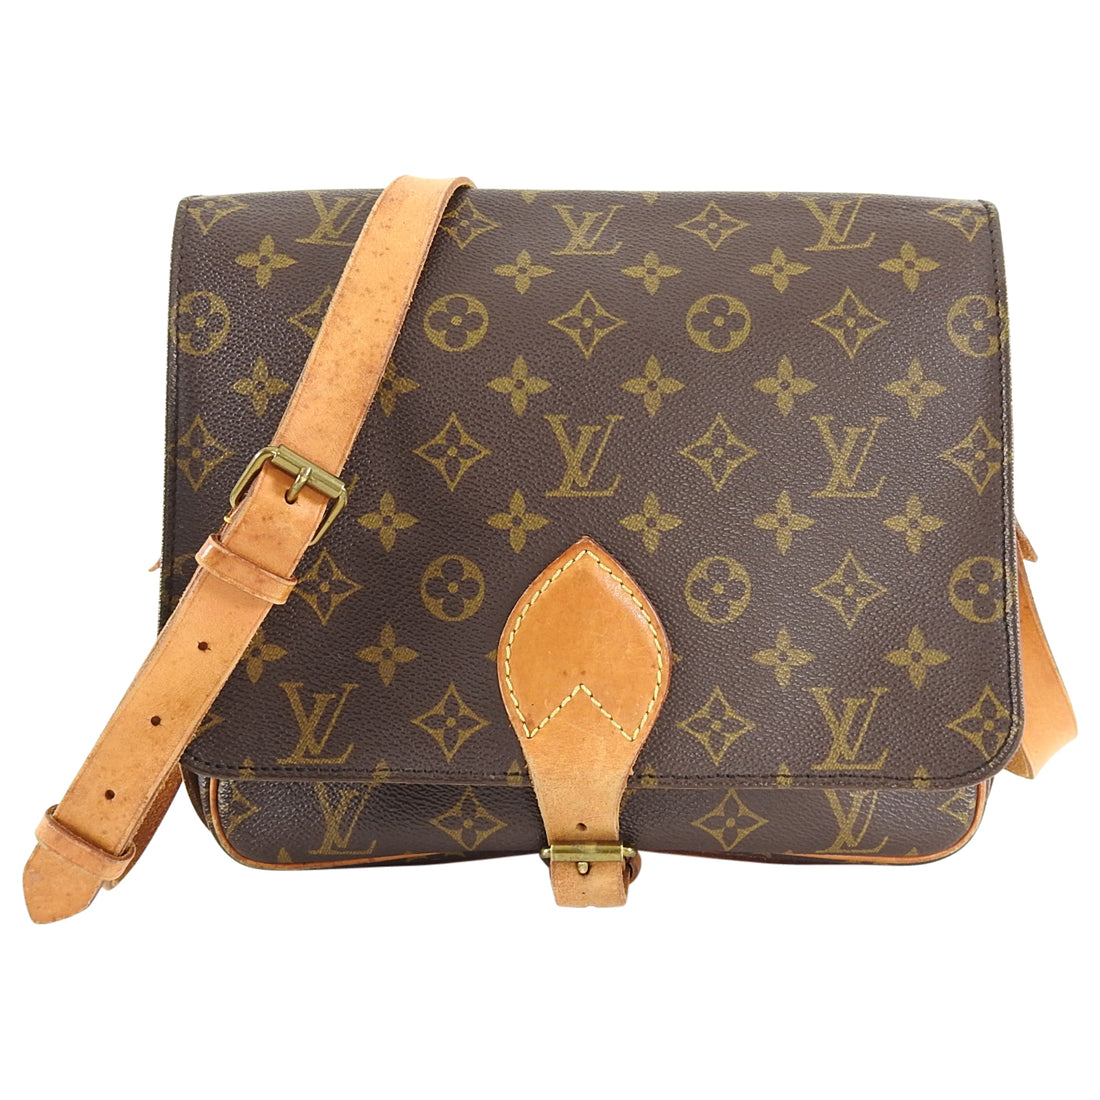 Cartouchiere GM  Used & Preloved Louis Vuitton Messenger Bag